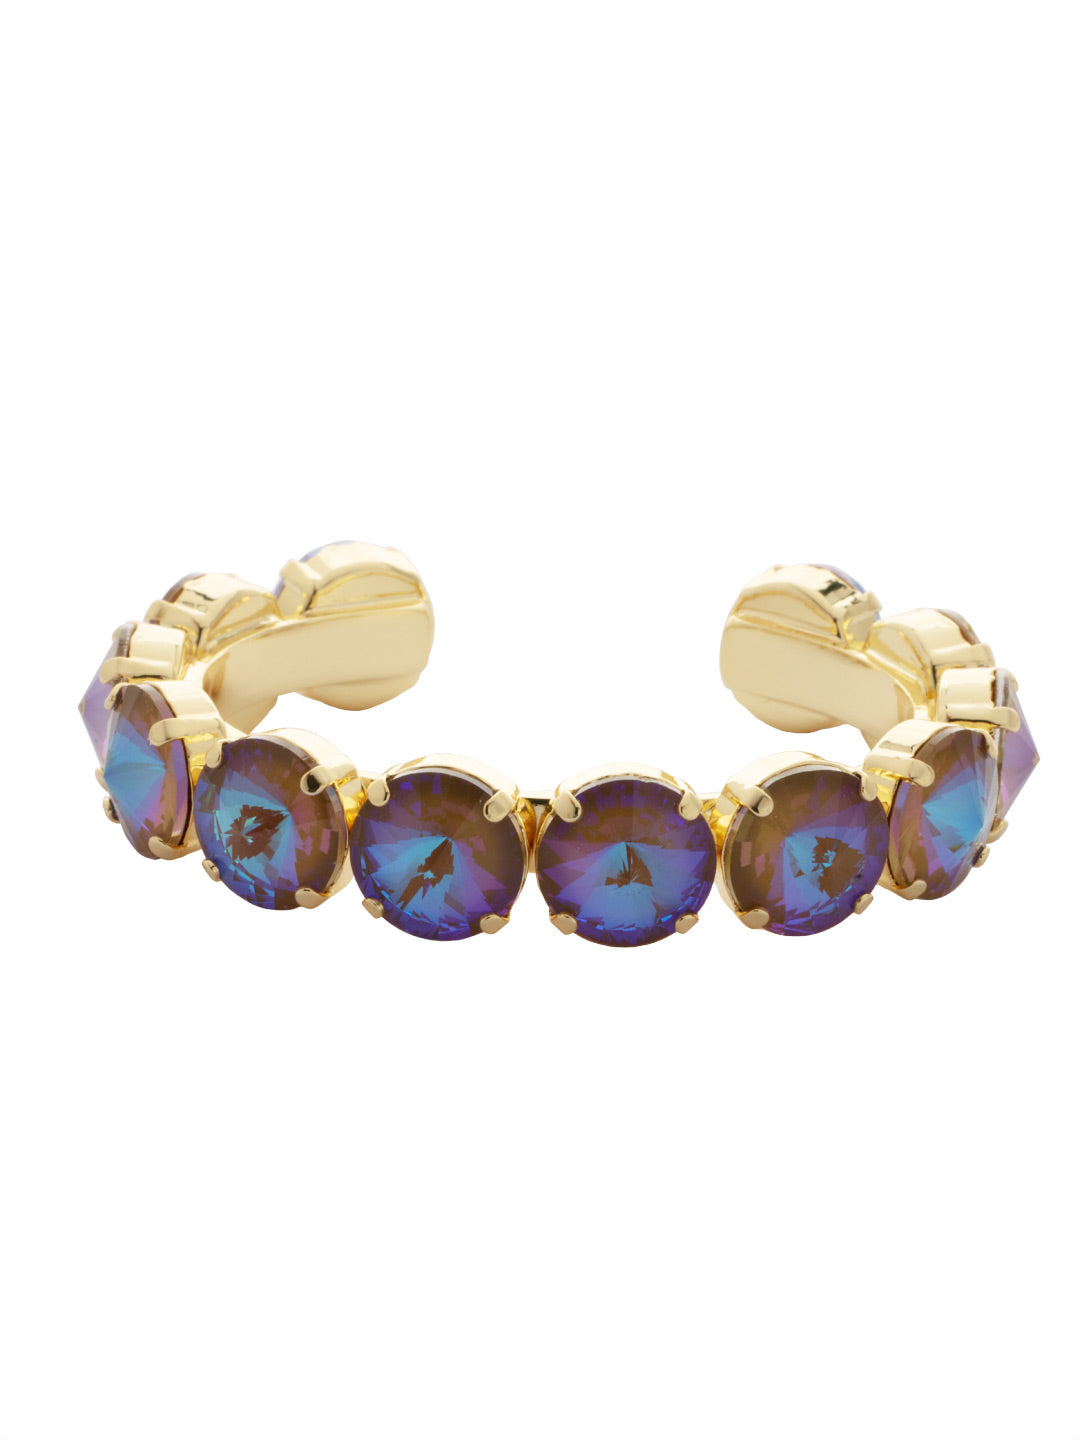 Nadine Cuff Bracelet - 4BEZ17BGCAO - <p>The Nadine Cuff Bracelet makes a bold statement; chunky round crystals fully encompass an adjustable metal band. From Sorrelli's Cappucino collection in our Bright Gold-tone finish.</p>